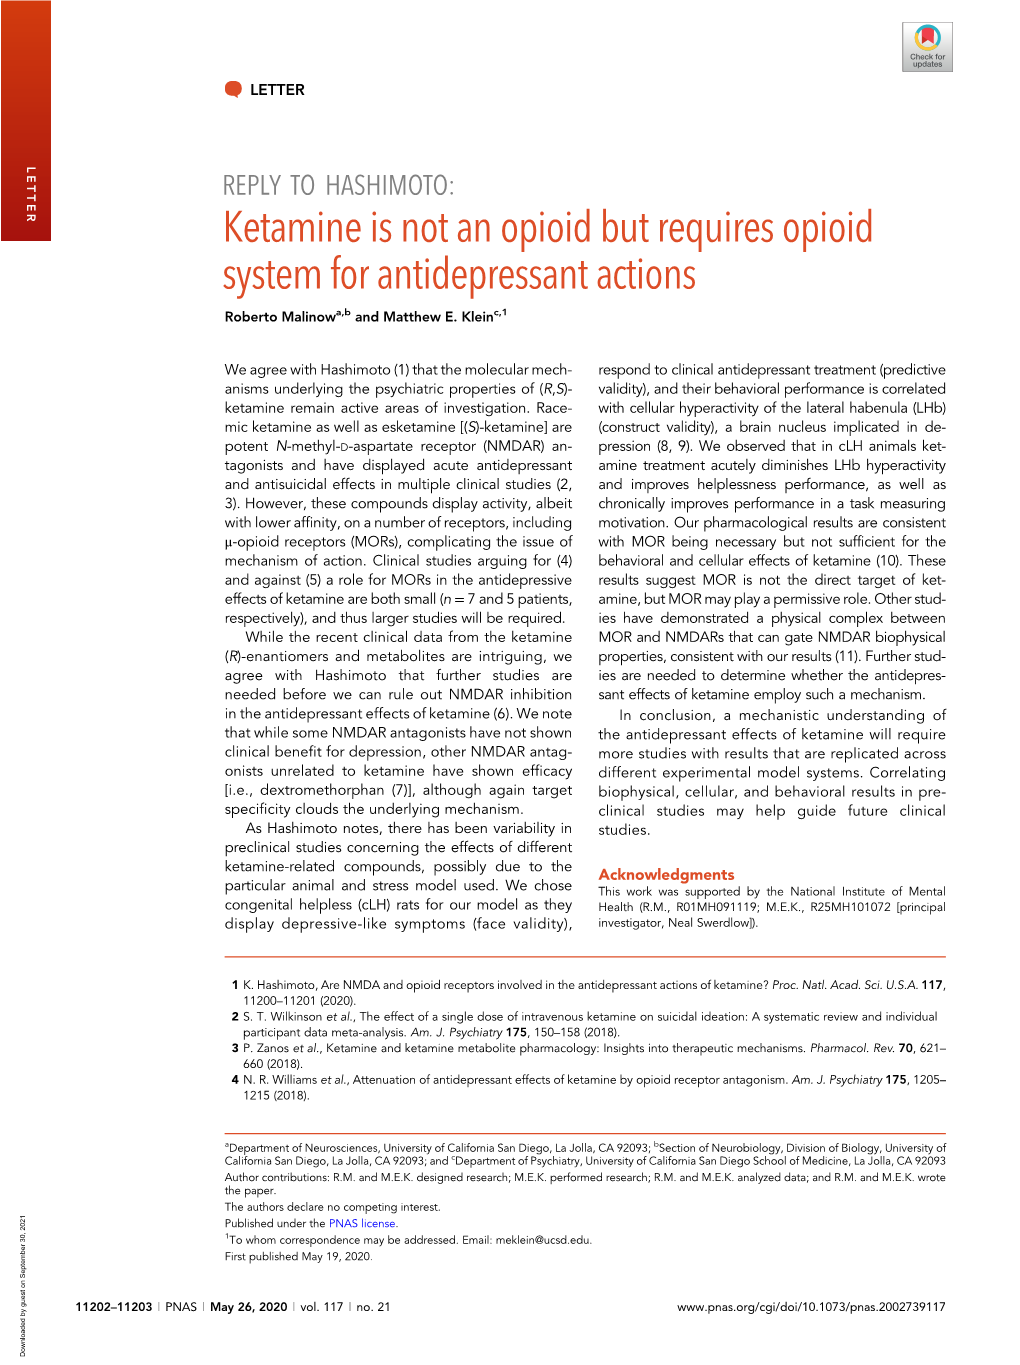 Ketamine Is Not an Opioid but Requires Opioid System for Antidepressant Actions